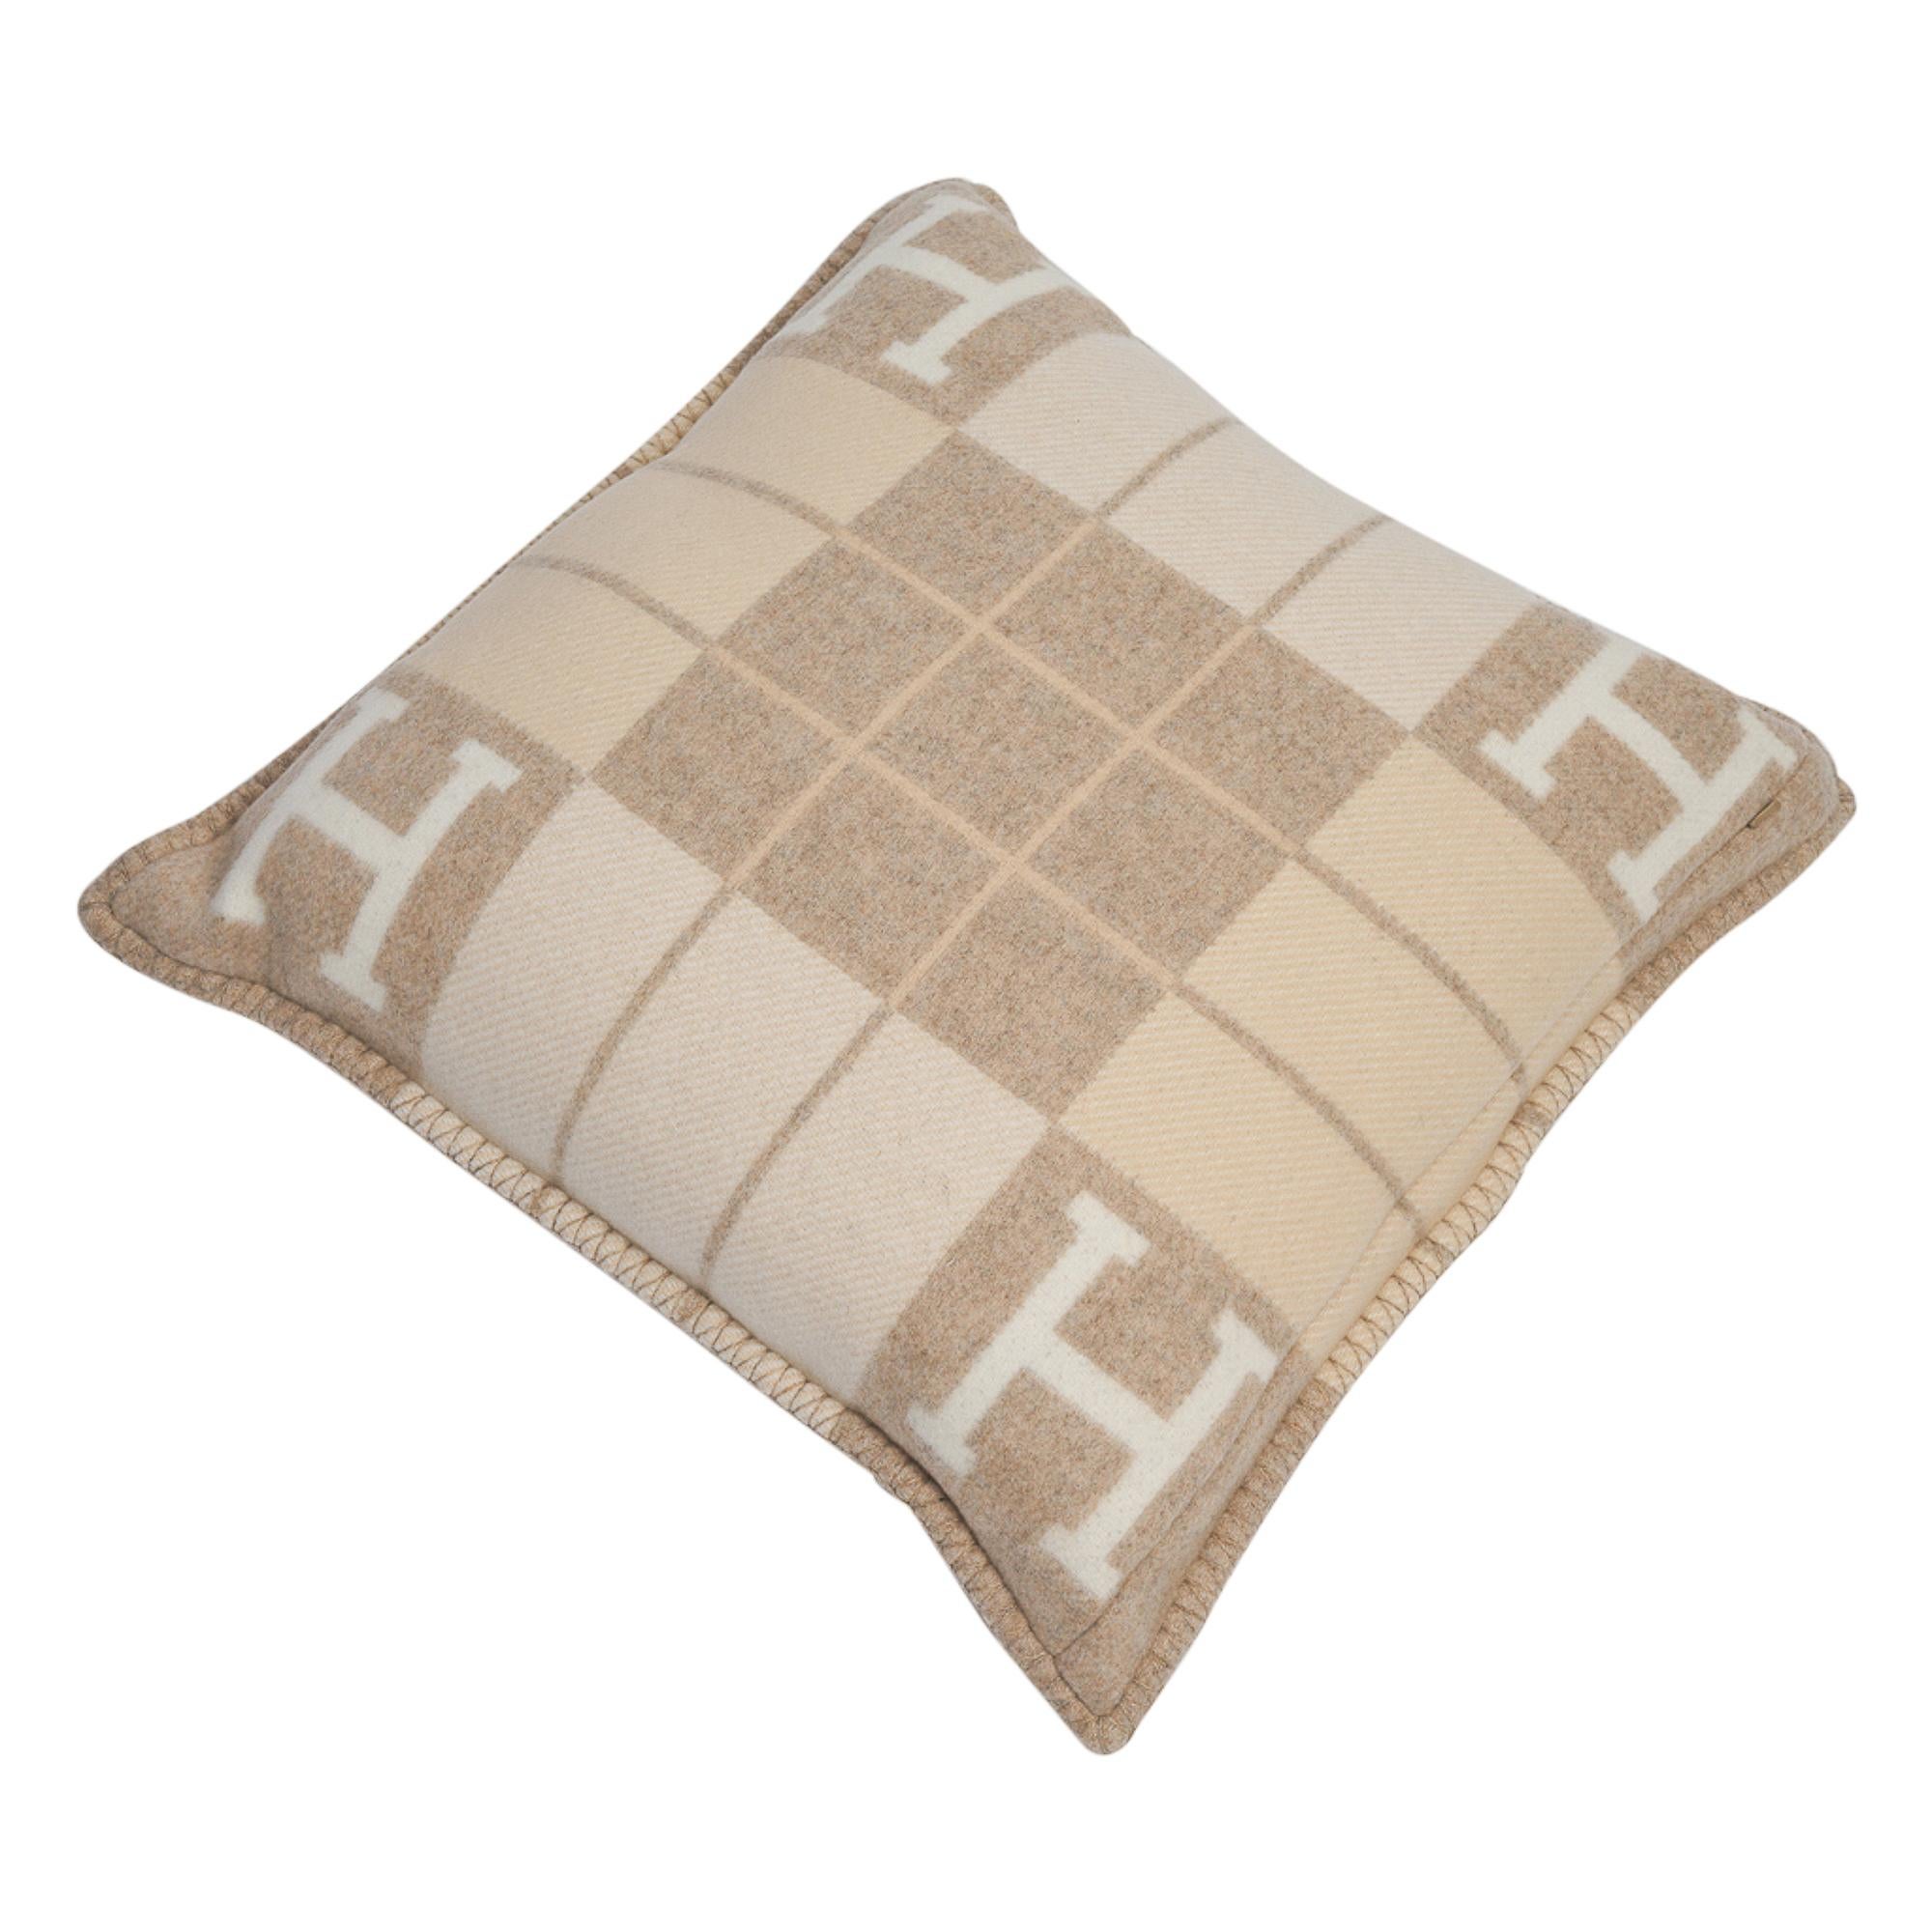 Women's or Men's Hermes Cushion Avalon III PM H Coco and Camomille Throw Pillow Set of Two